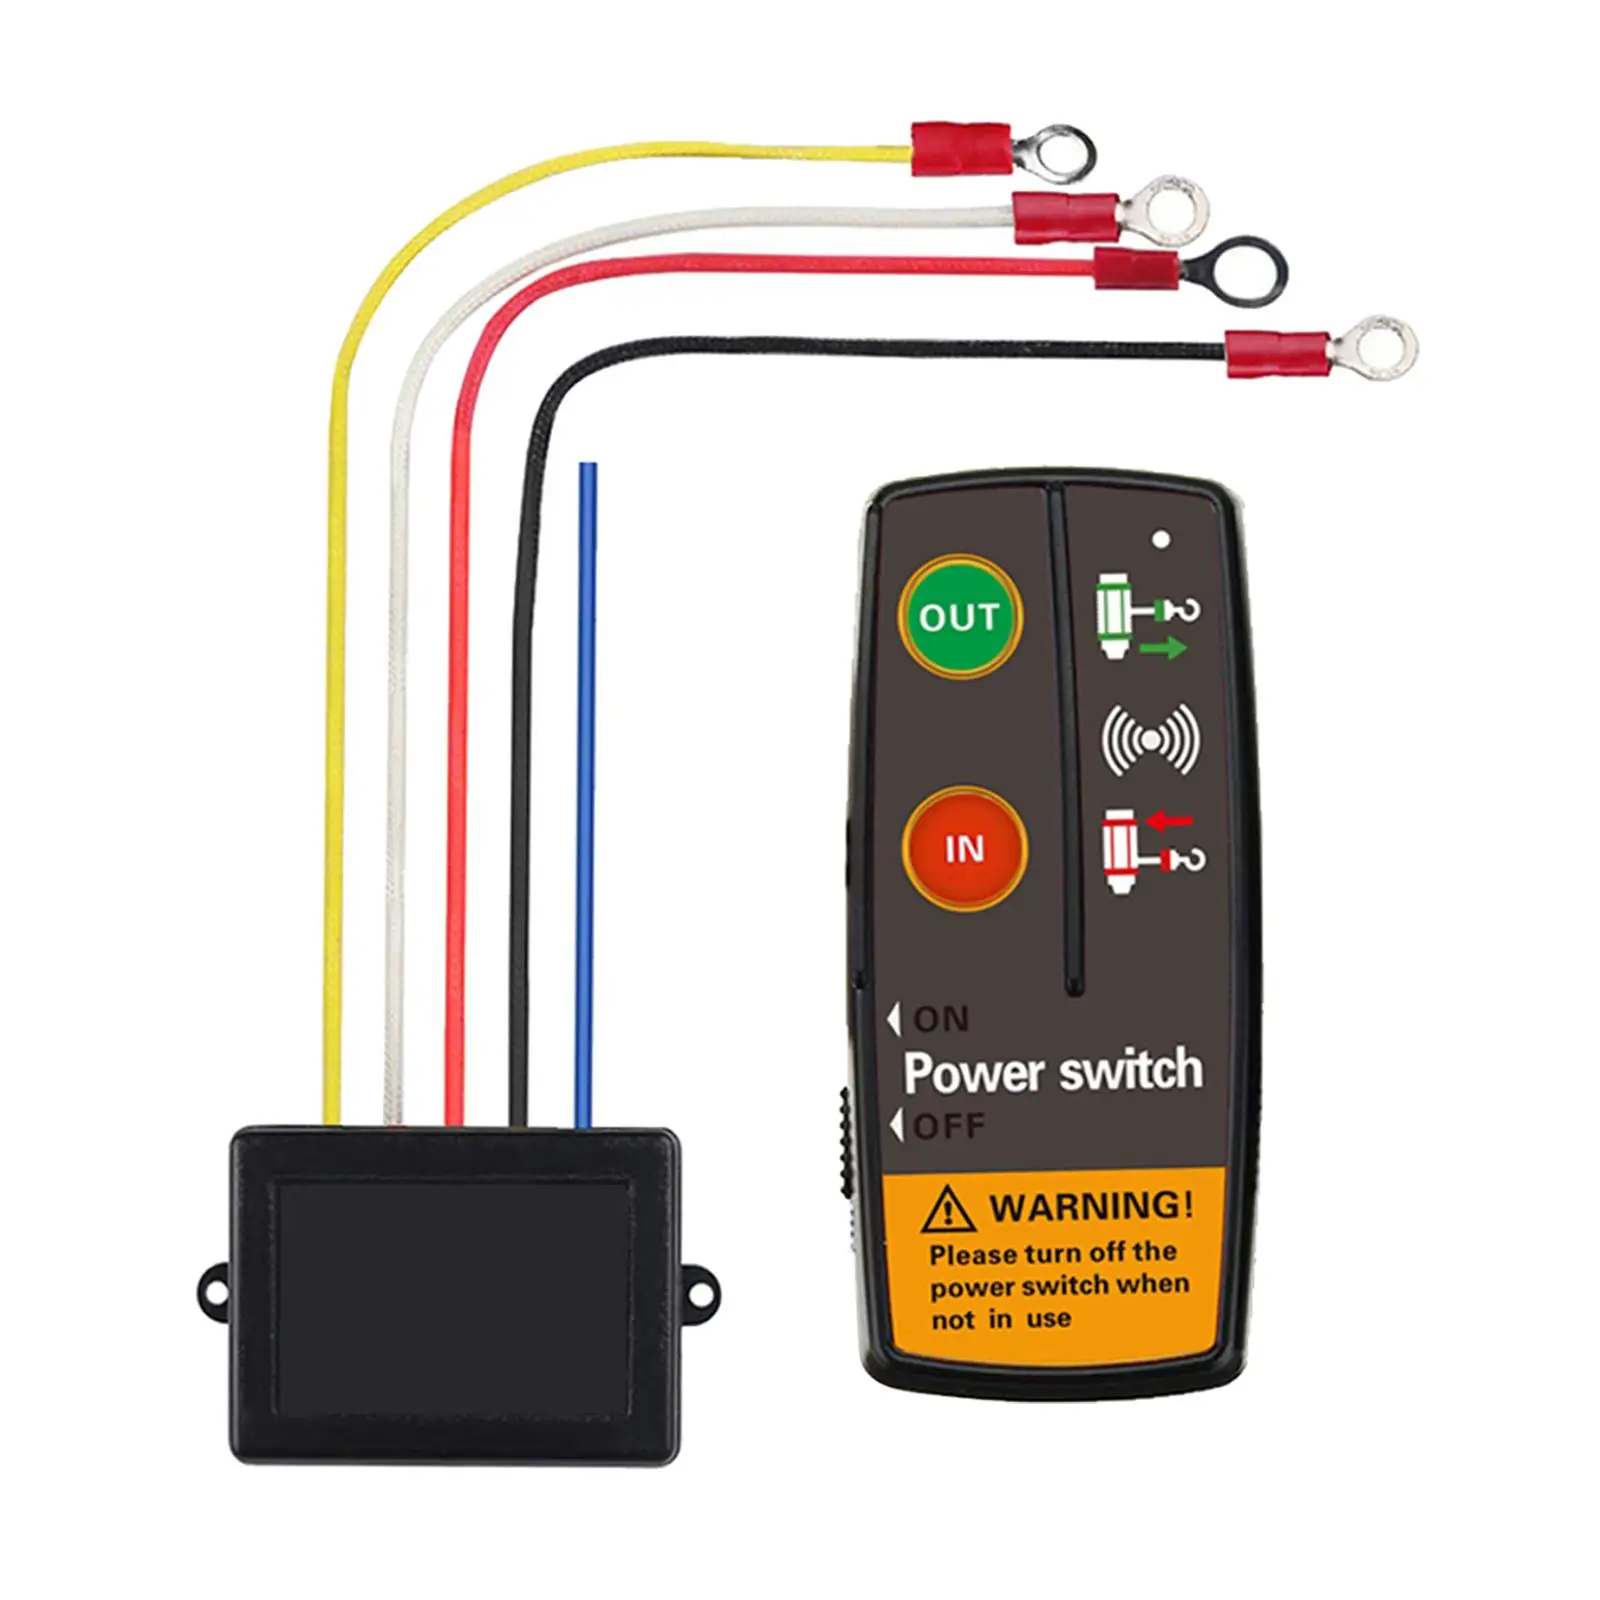 Winch Wireless Remote Control Switch Set with Indicator Light Replaces Winch Remote Control for UTV SUV Vehicle Trailer Car